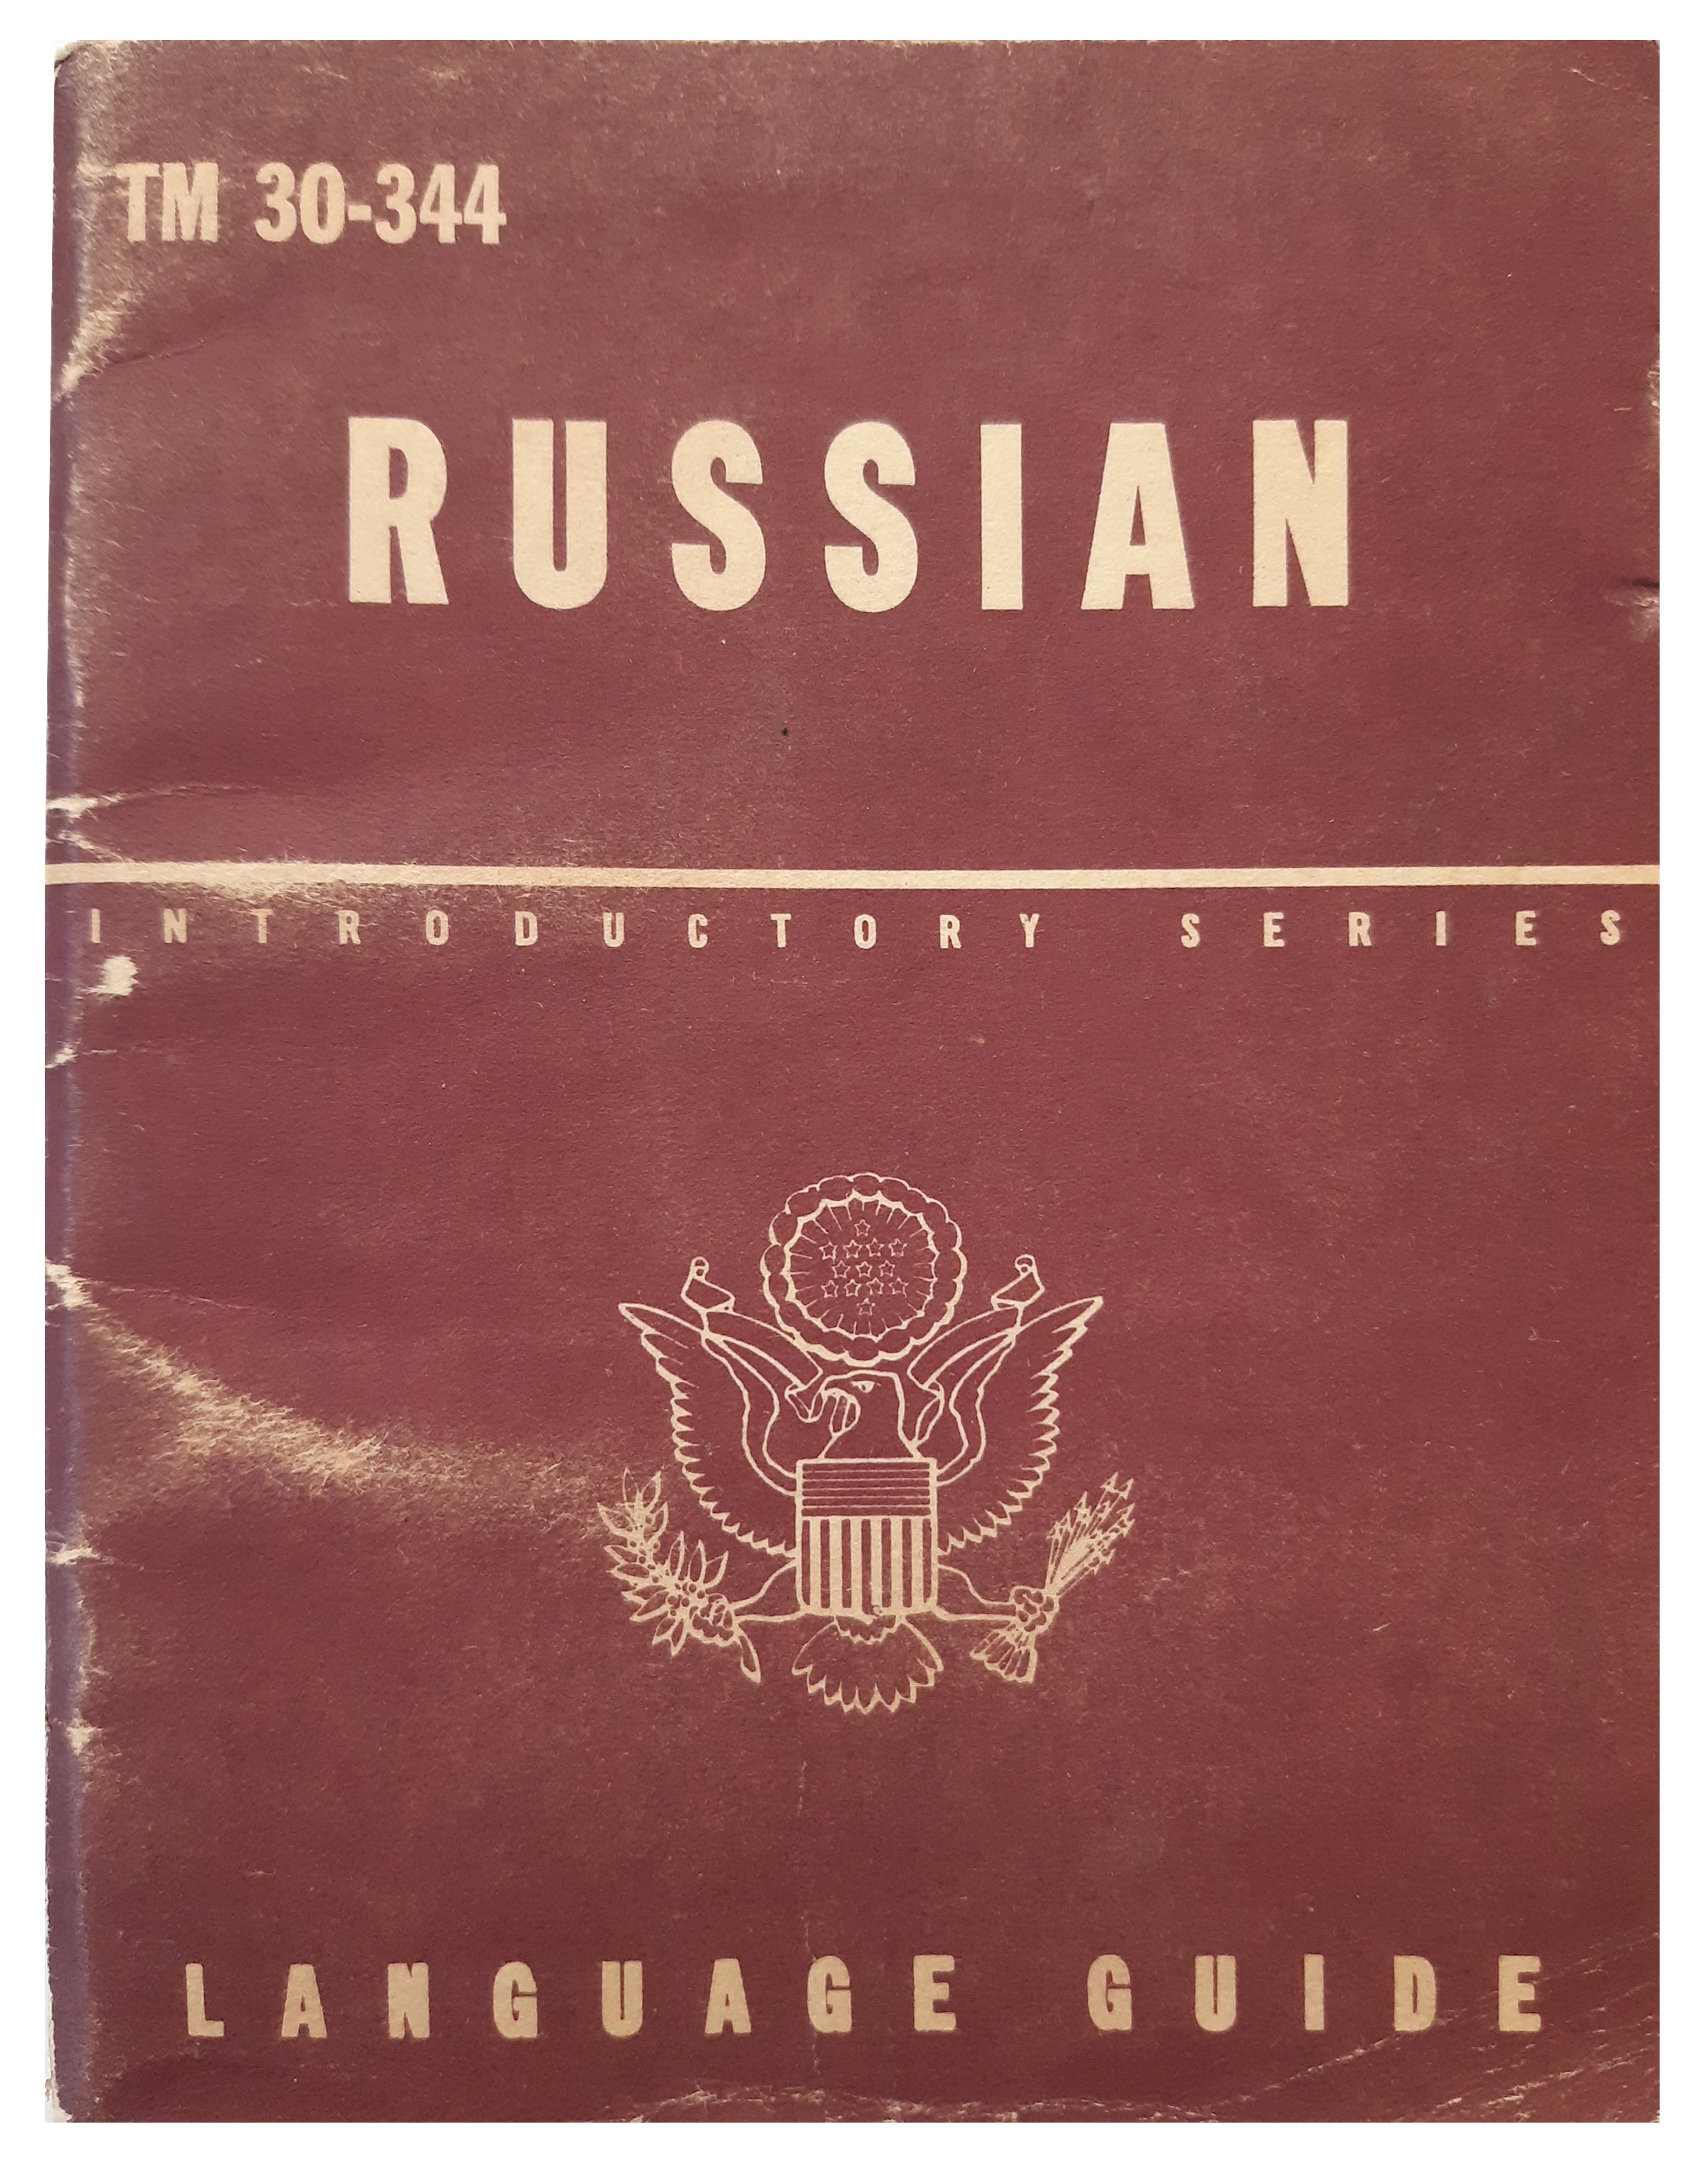 WWII US TECHNCAL RUSSIAN LANGUAGE GUIDE